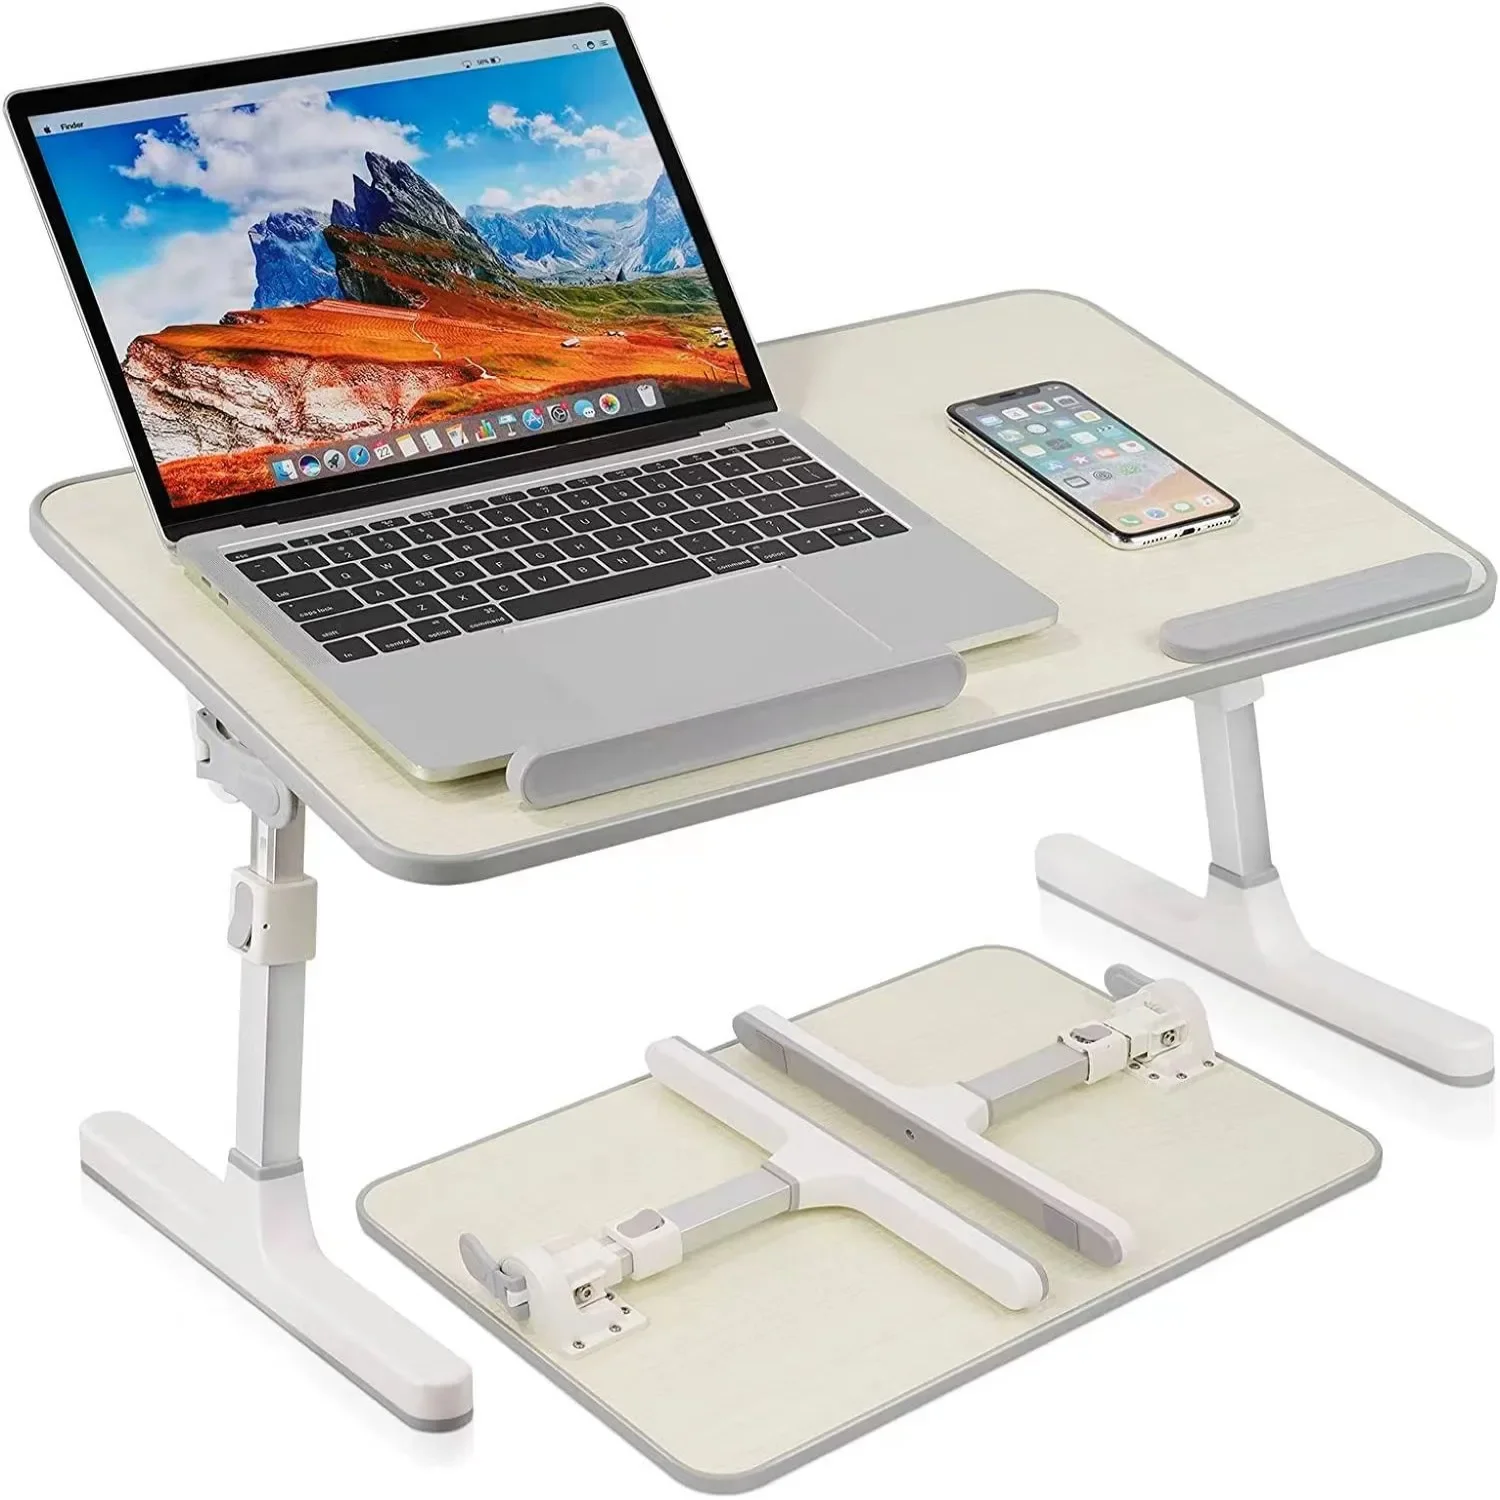 Foldable Lazy Laptop Table Bed Small Table Livable Laptop Computer Table Dormitory Desk Student Writing Table folding bed small book table laptop lazy dormitory student household bedroom writing simple